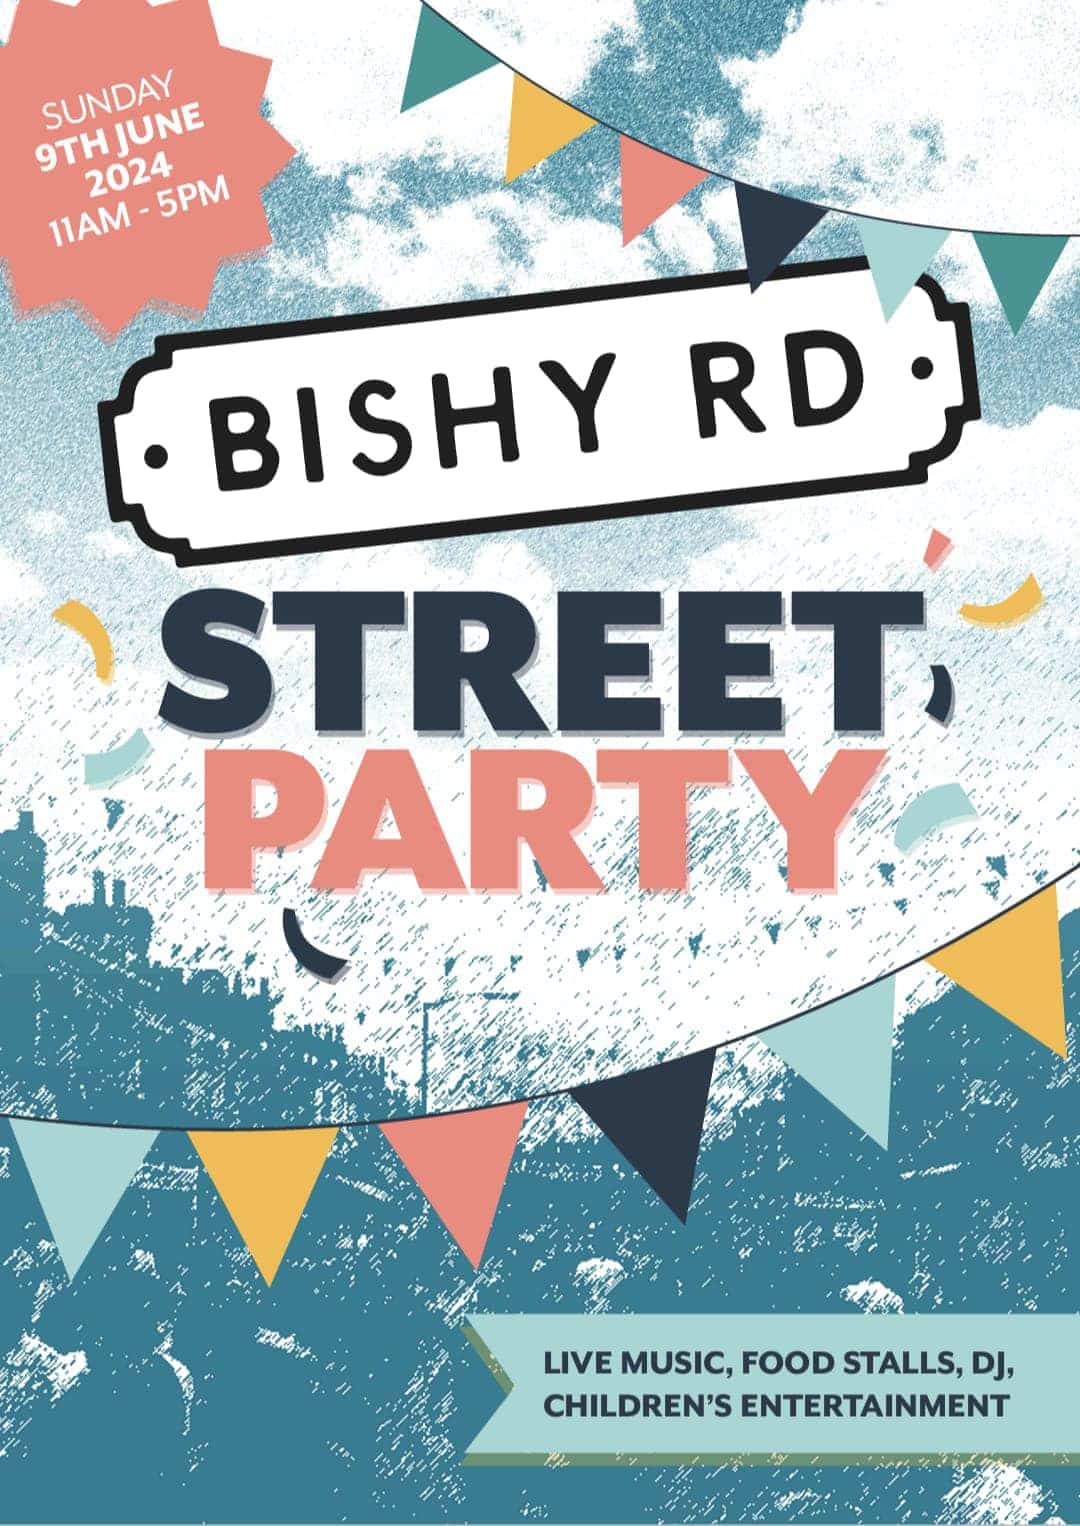 Bishy Road street party 2024